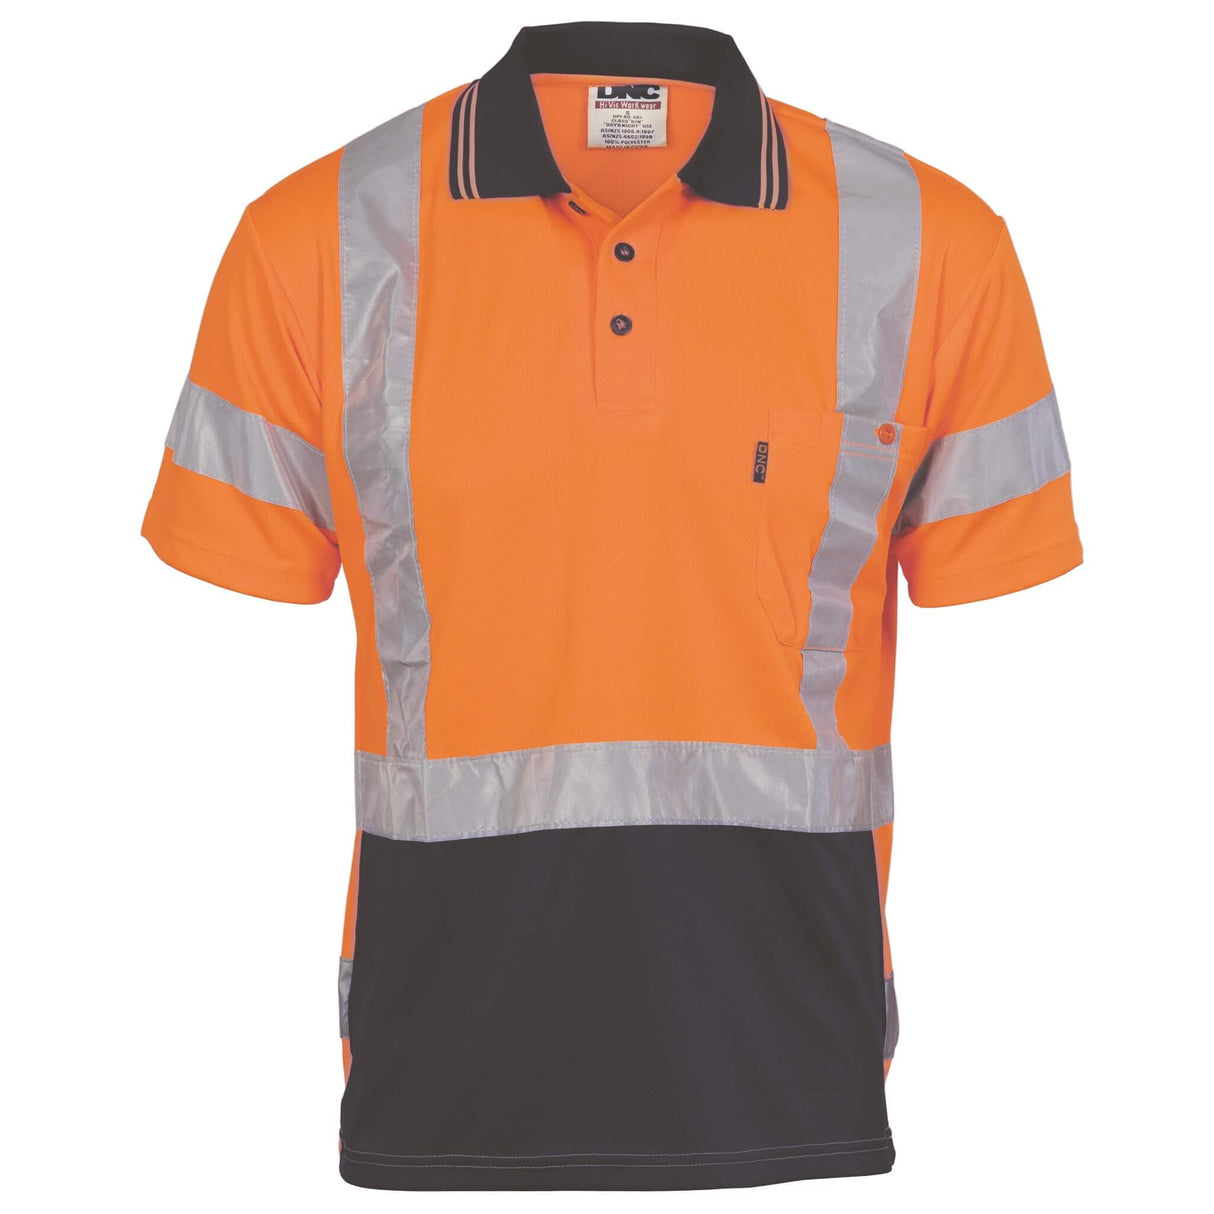 3712 HiVis D/N Cool Breathe Polo Shirt with Cross Back R/Tape - Short Sleeve